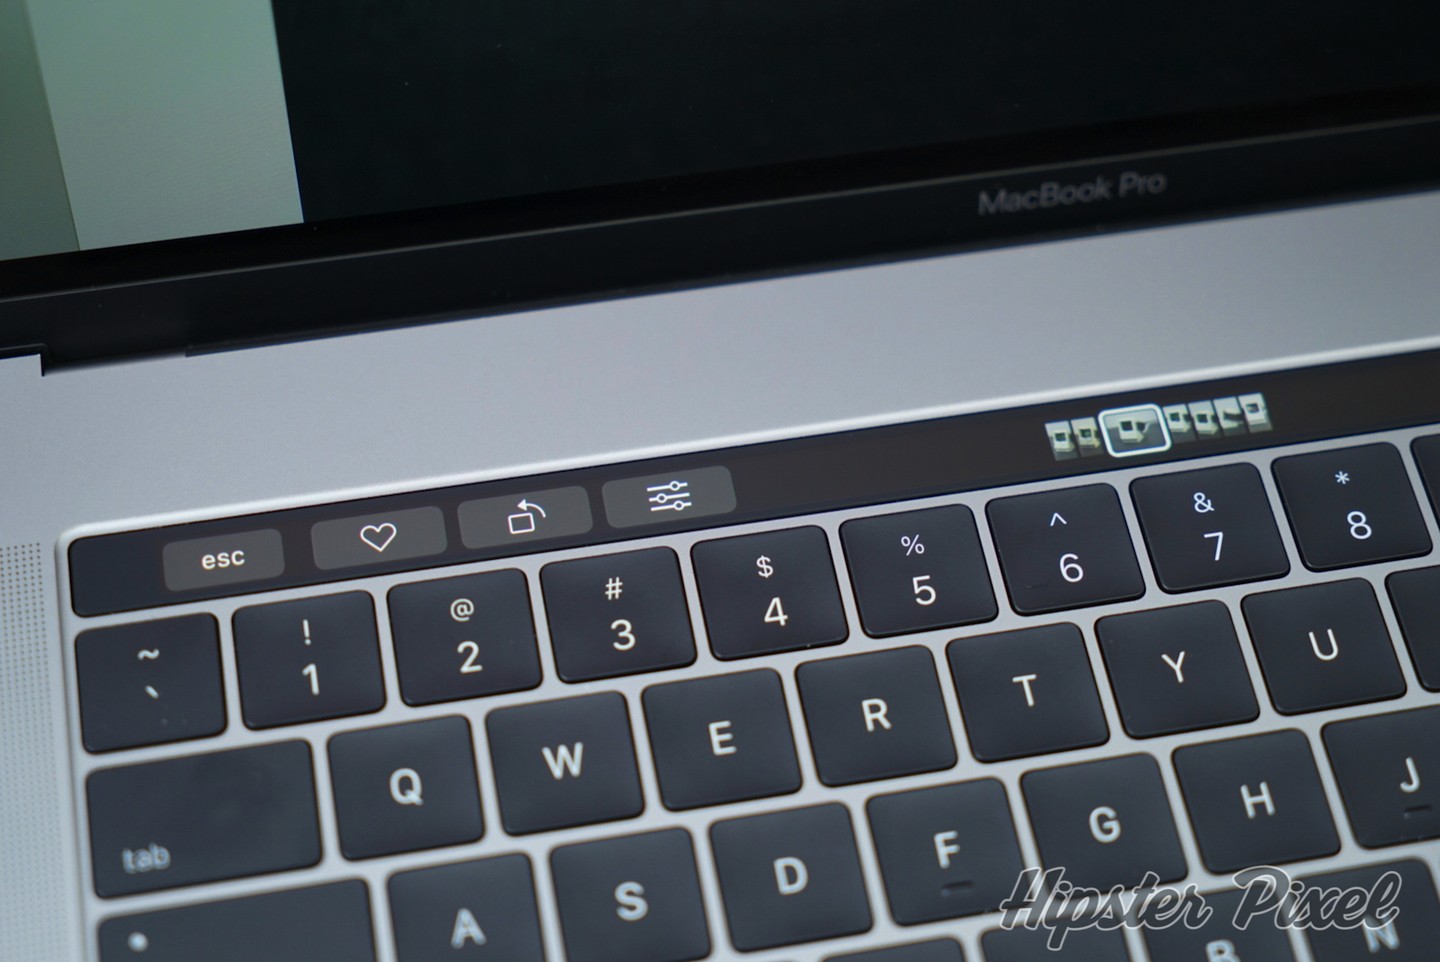 Touch Bar, a new UI paradigm